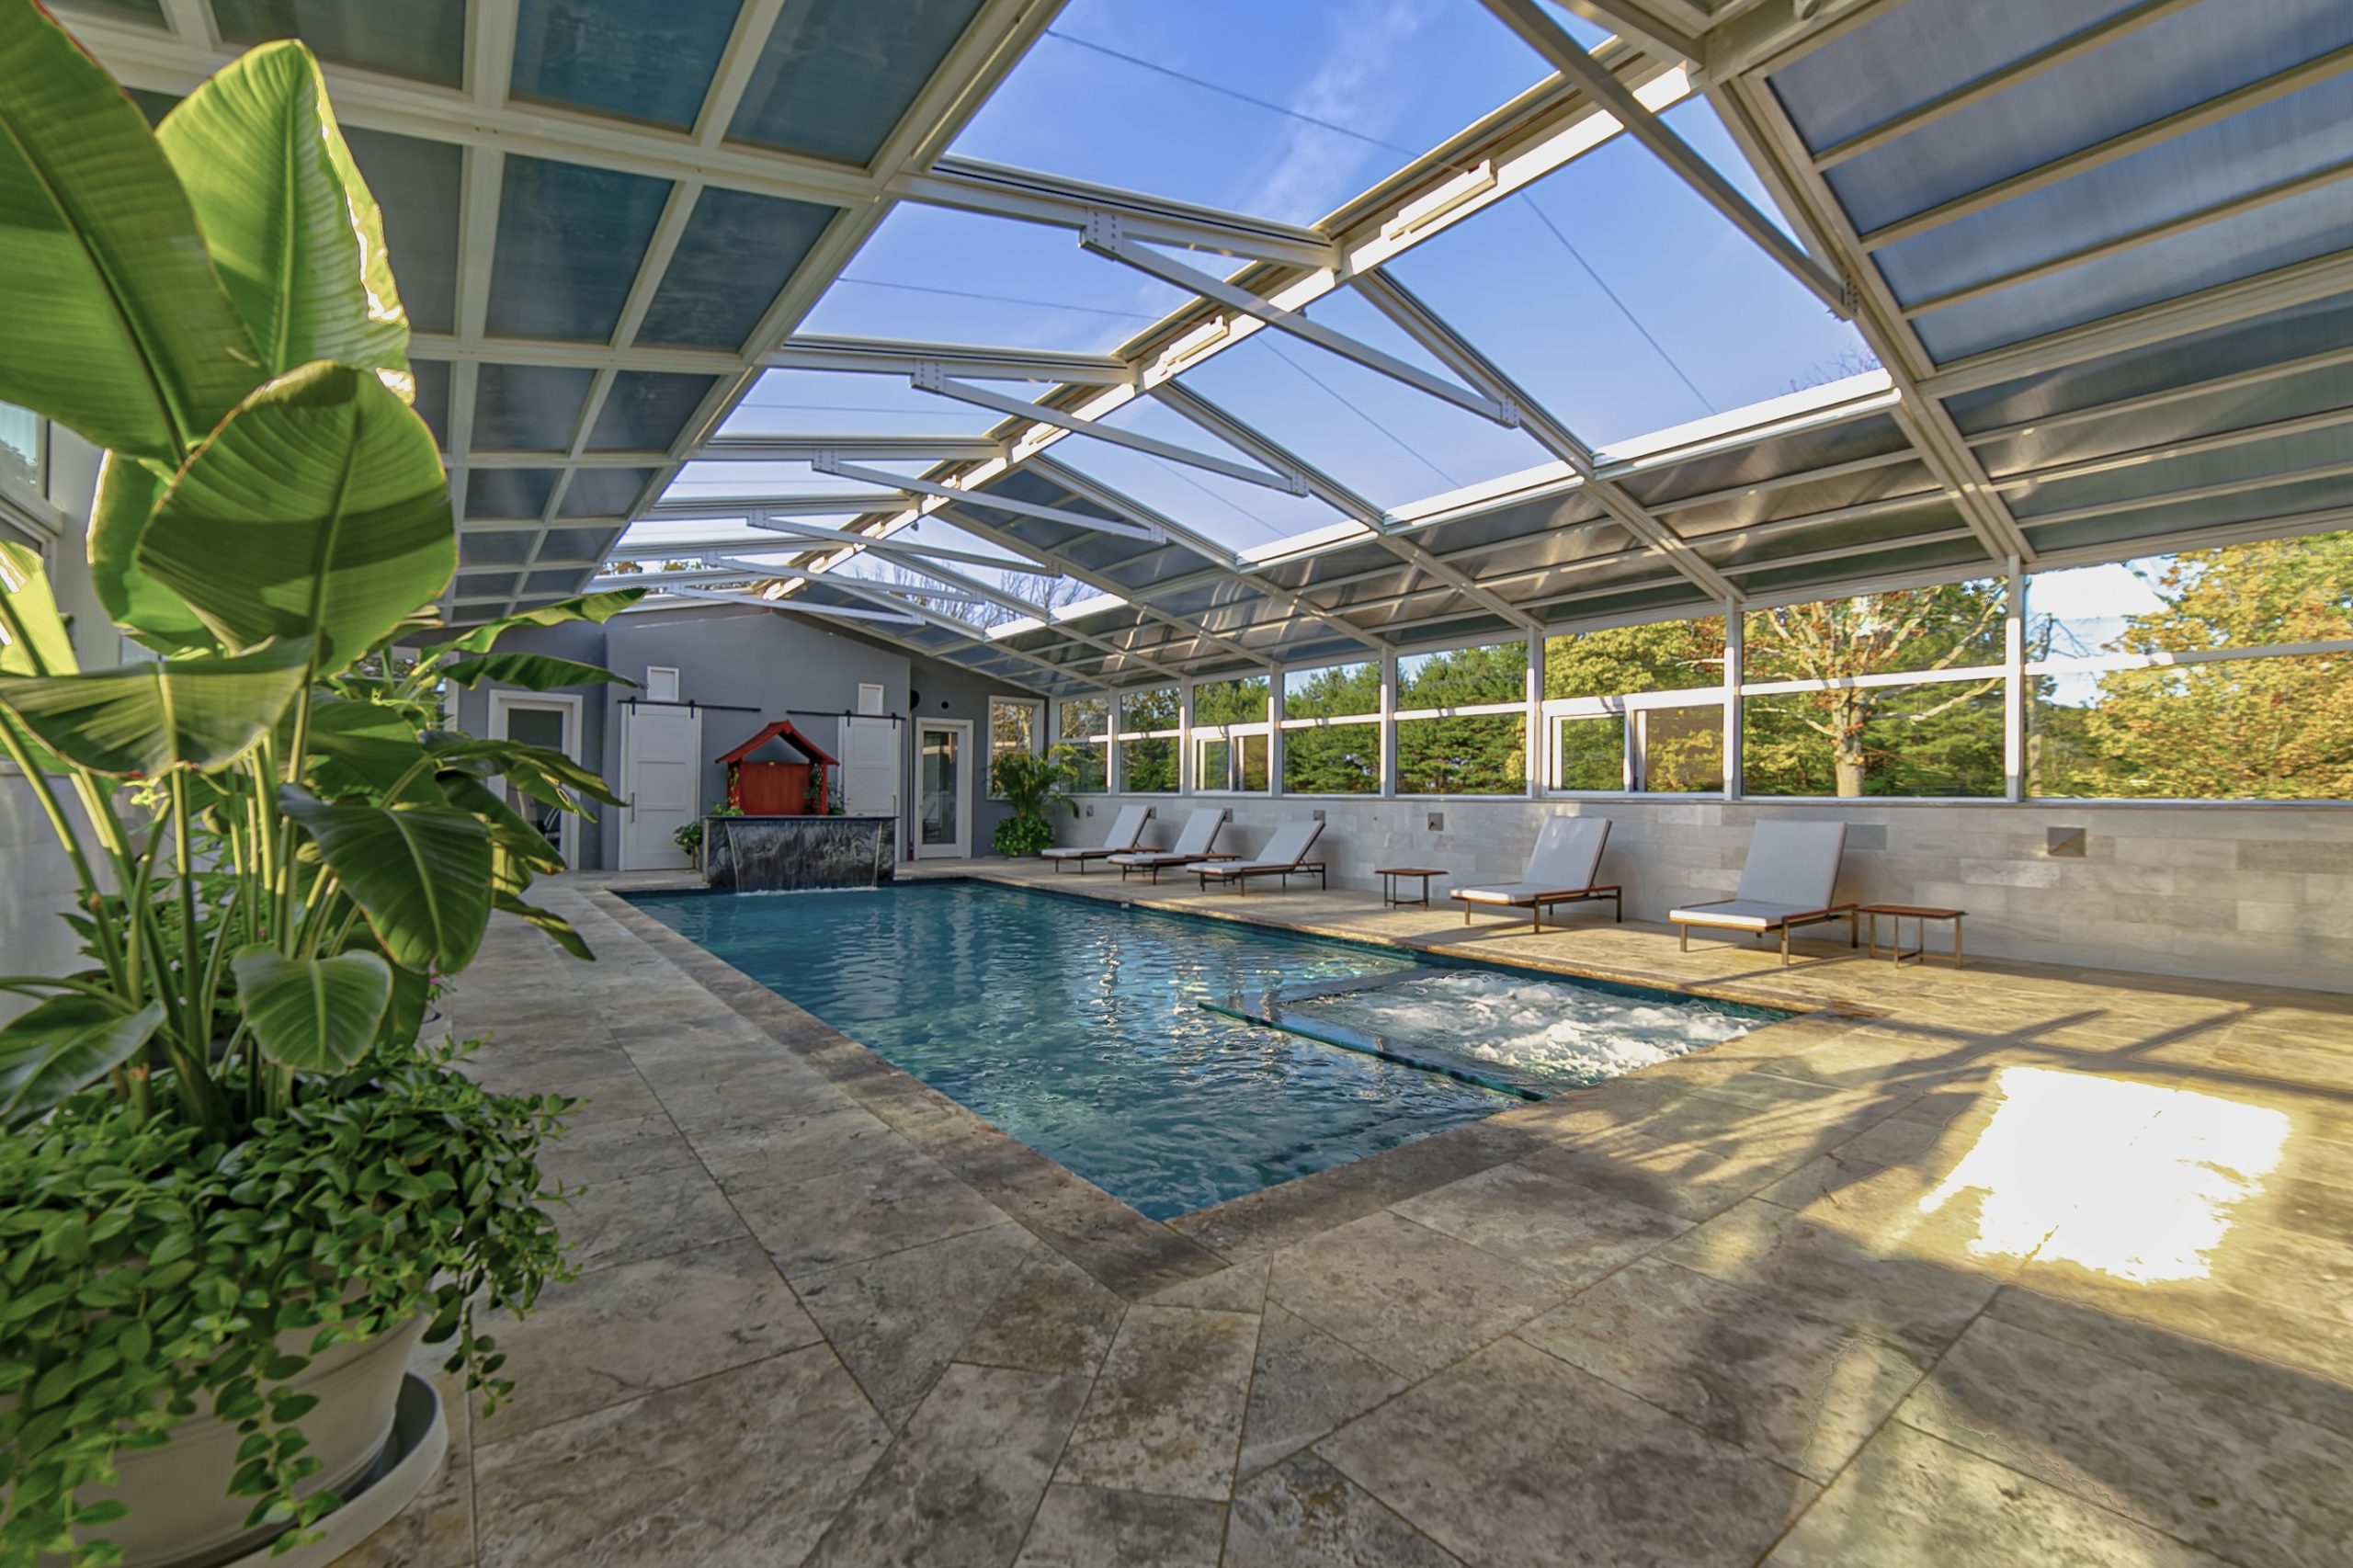 EverClear Pools & Spas to the Rescue: Vinyl Pool Repair Solutions Now Available